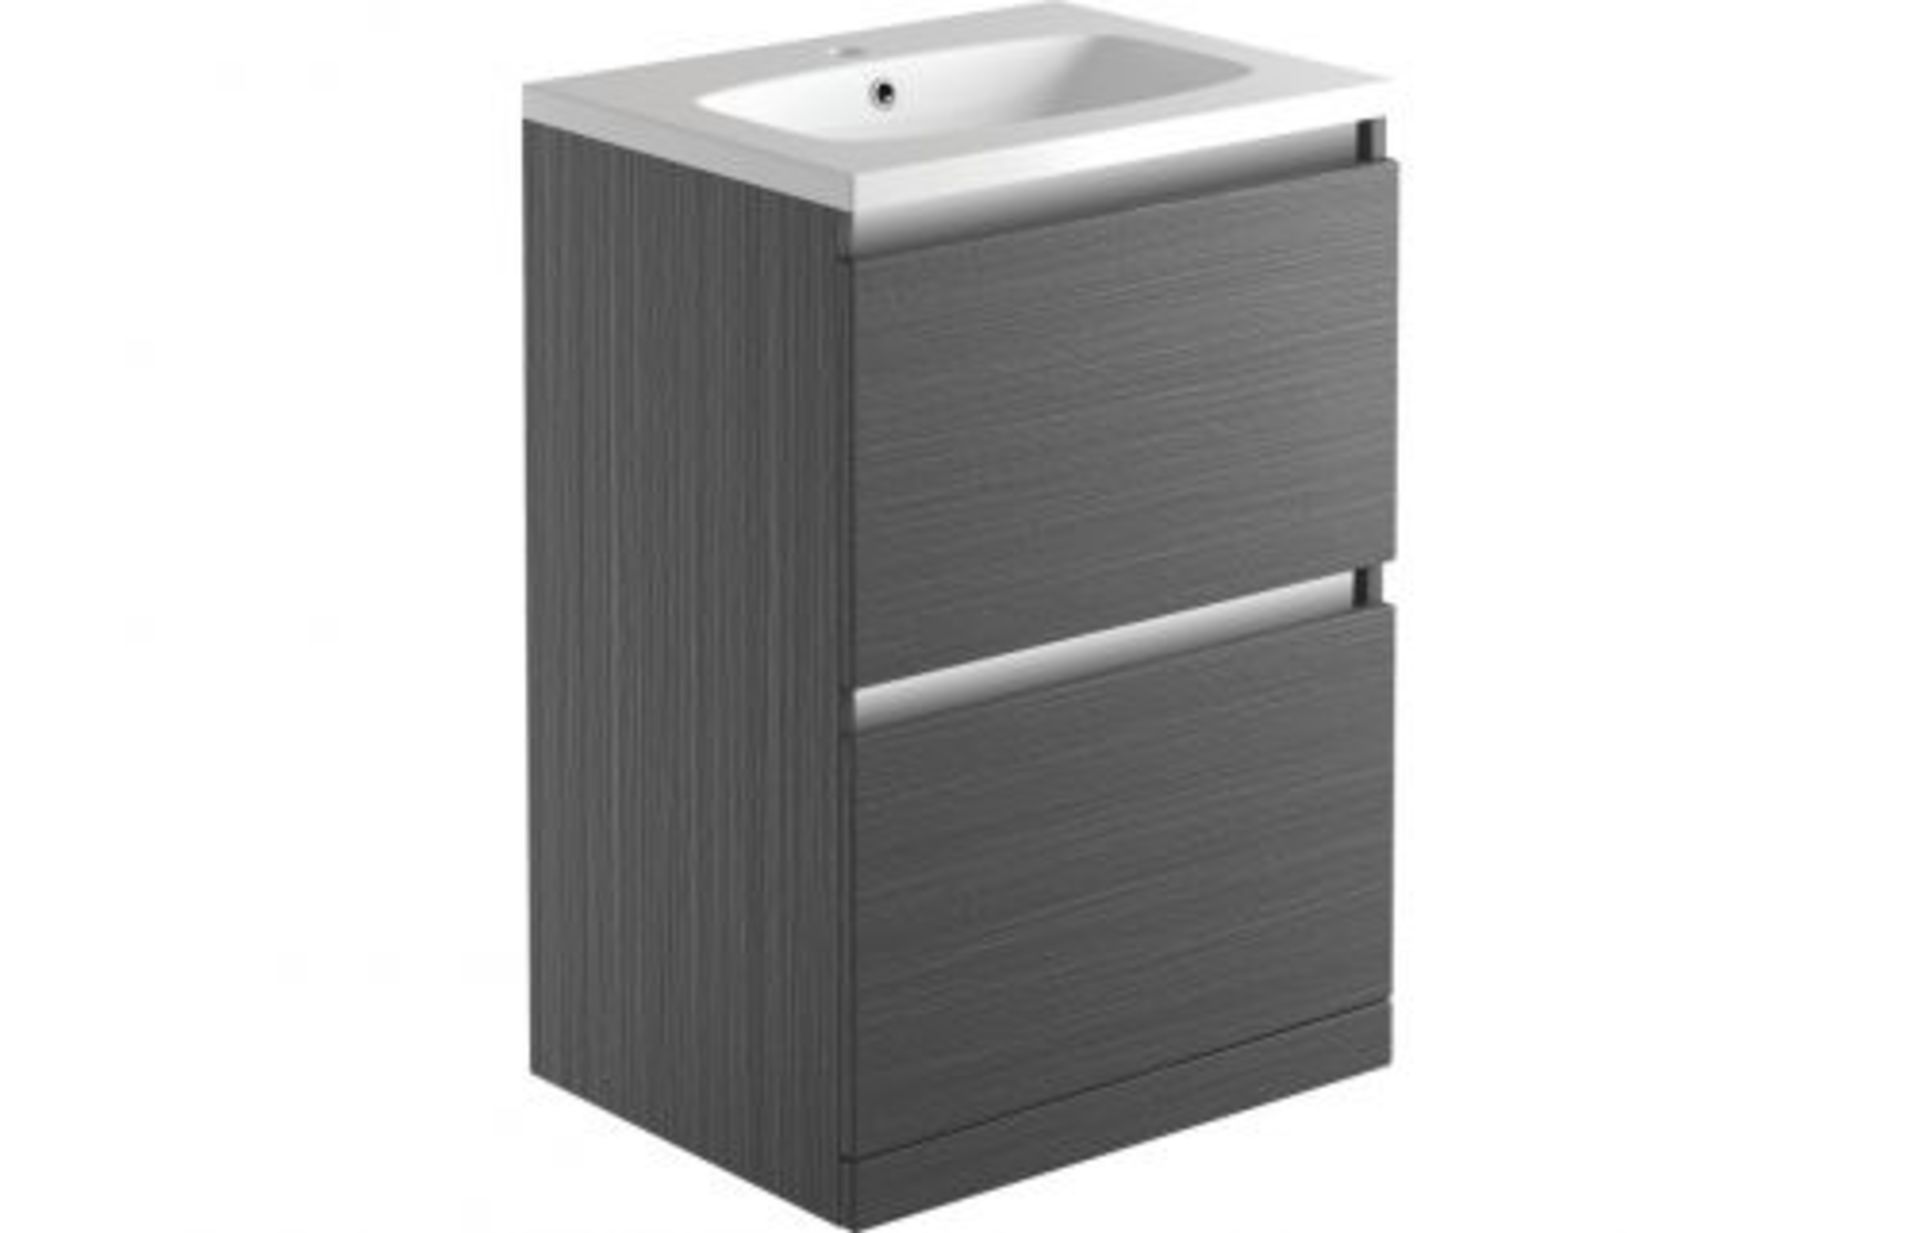 New (R56) Carino 600 mm 2 Drawer Floor Standing Vanity Unit - Graphite wood Fully Handle less... - Image 2 of 2